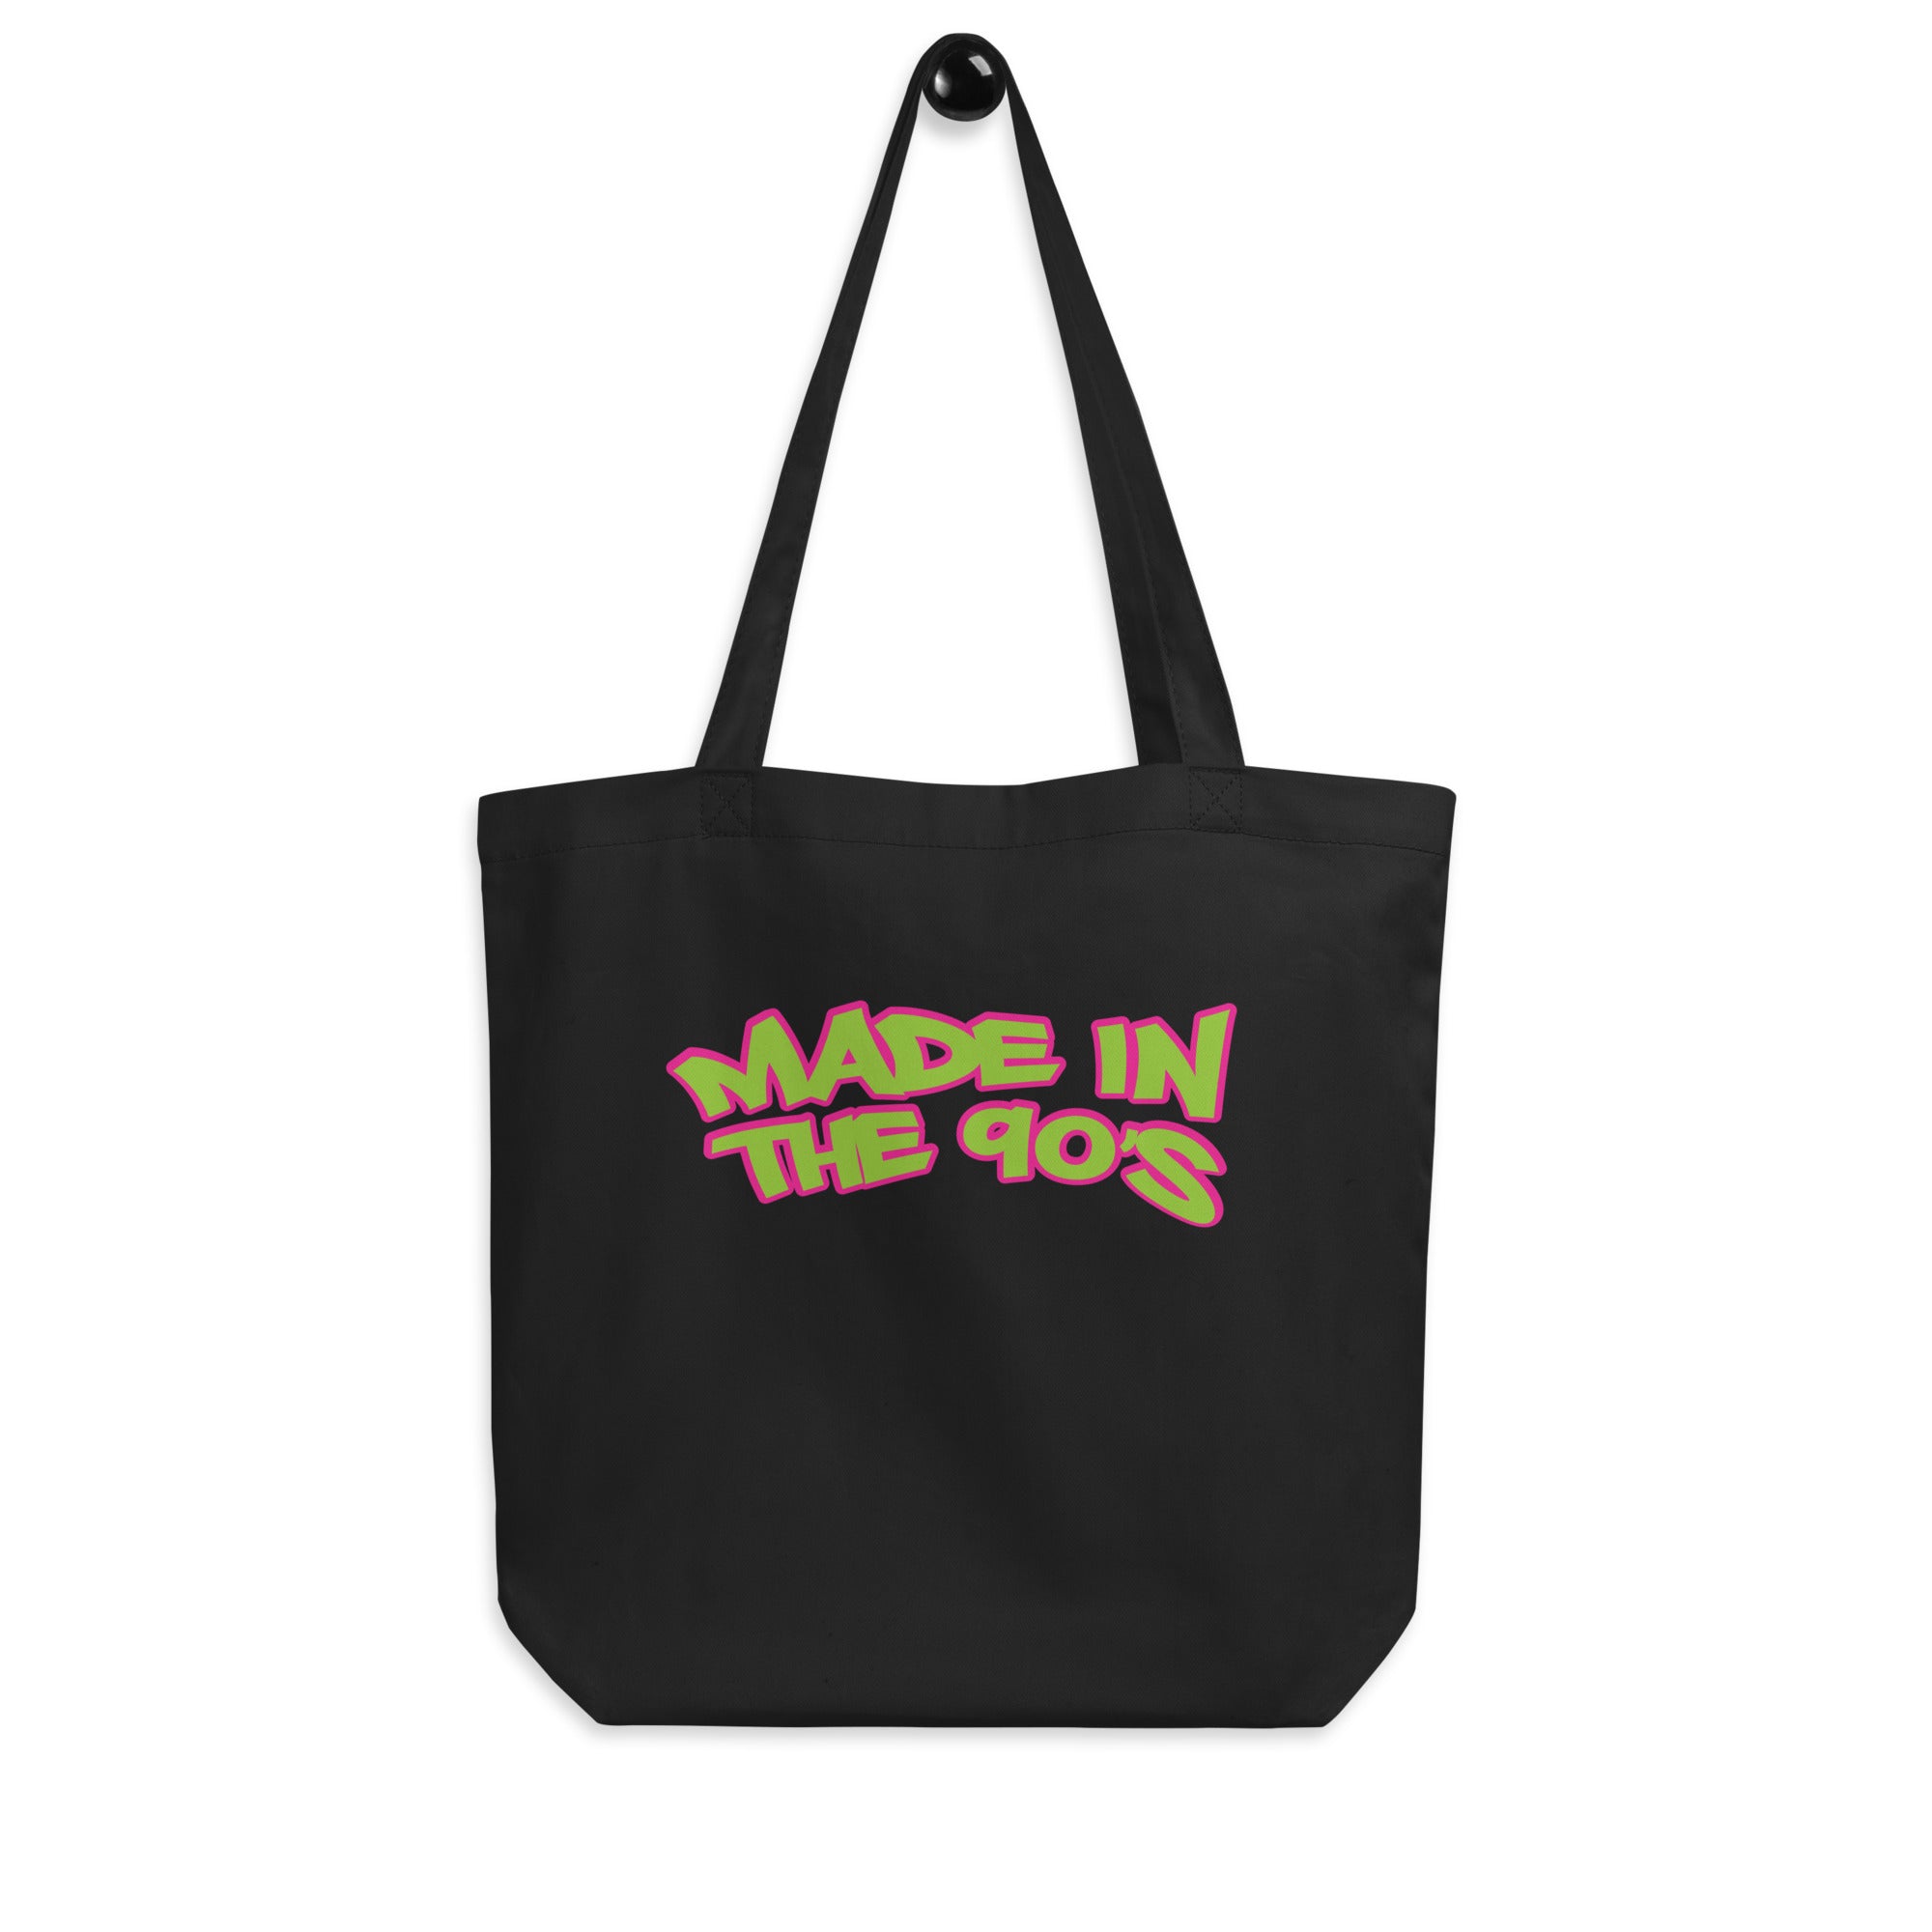 Made In The 90's Eco Tote Bag